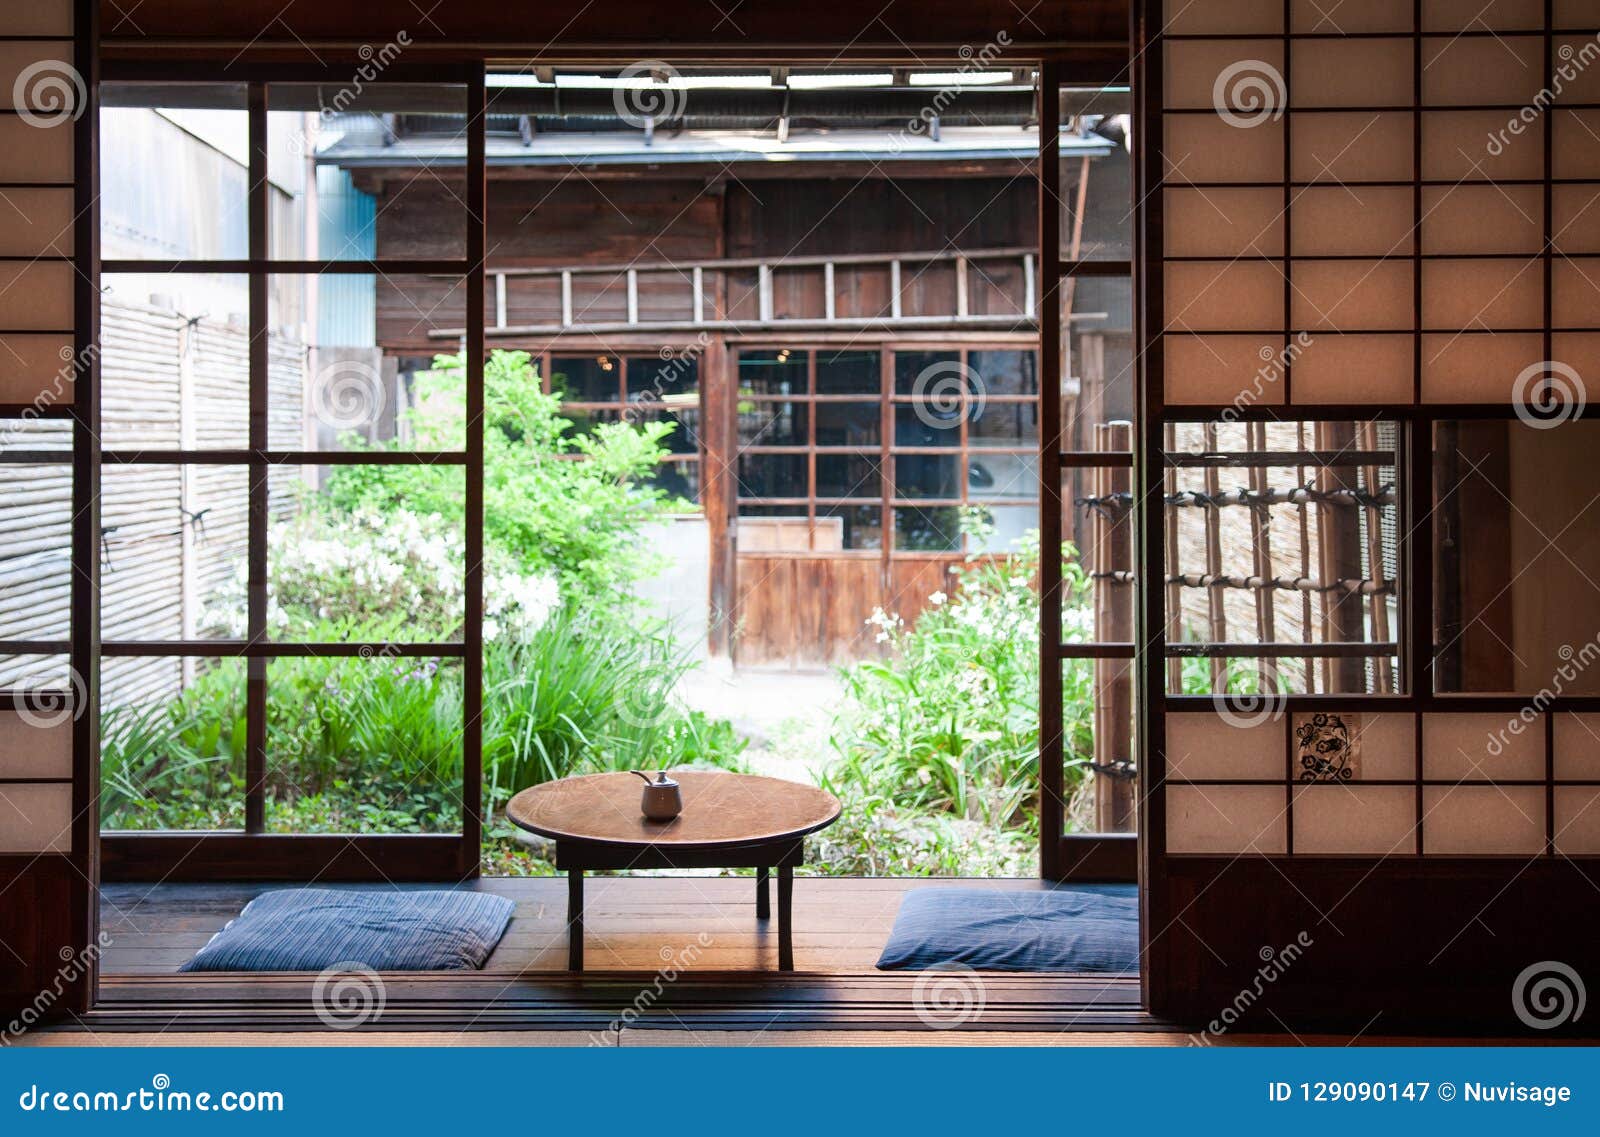 Old Japanese Houses Interior Famous Cafe Melon Bun Shop Of